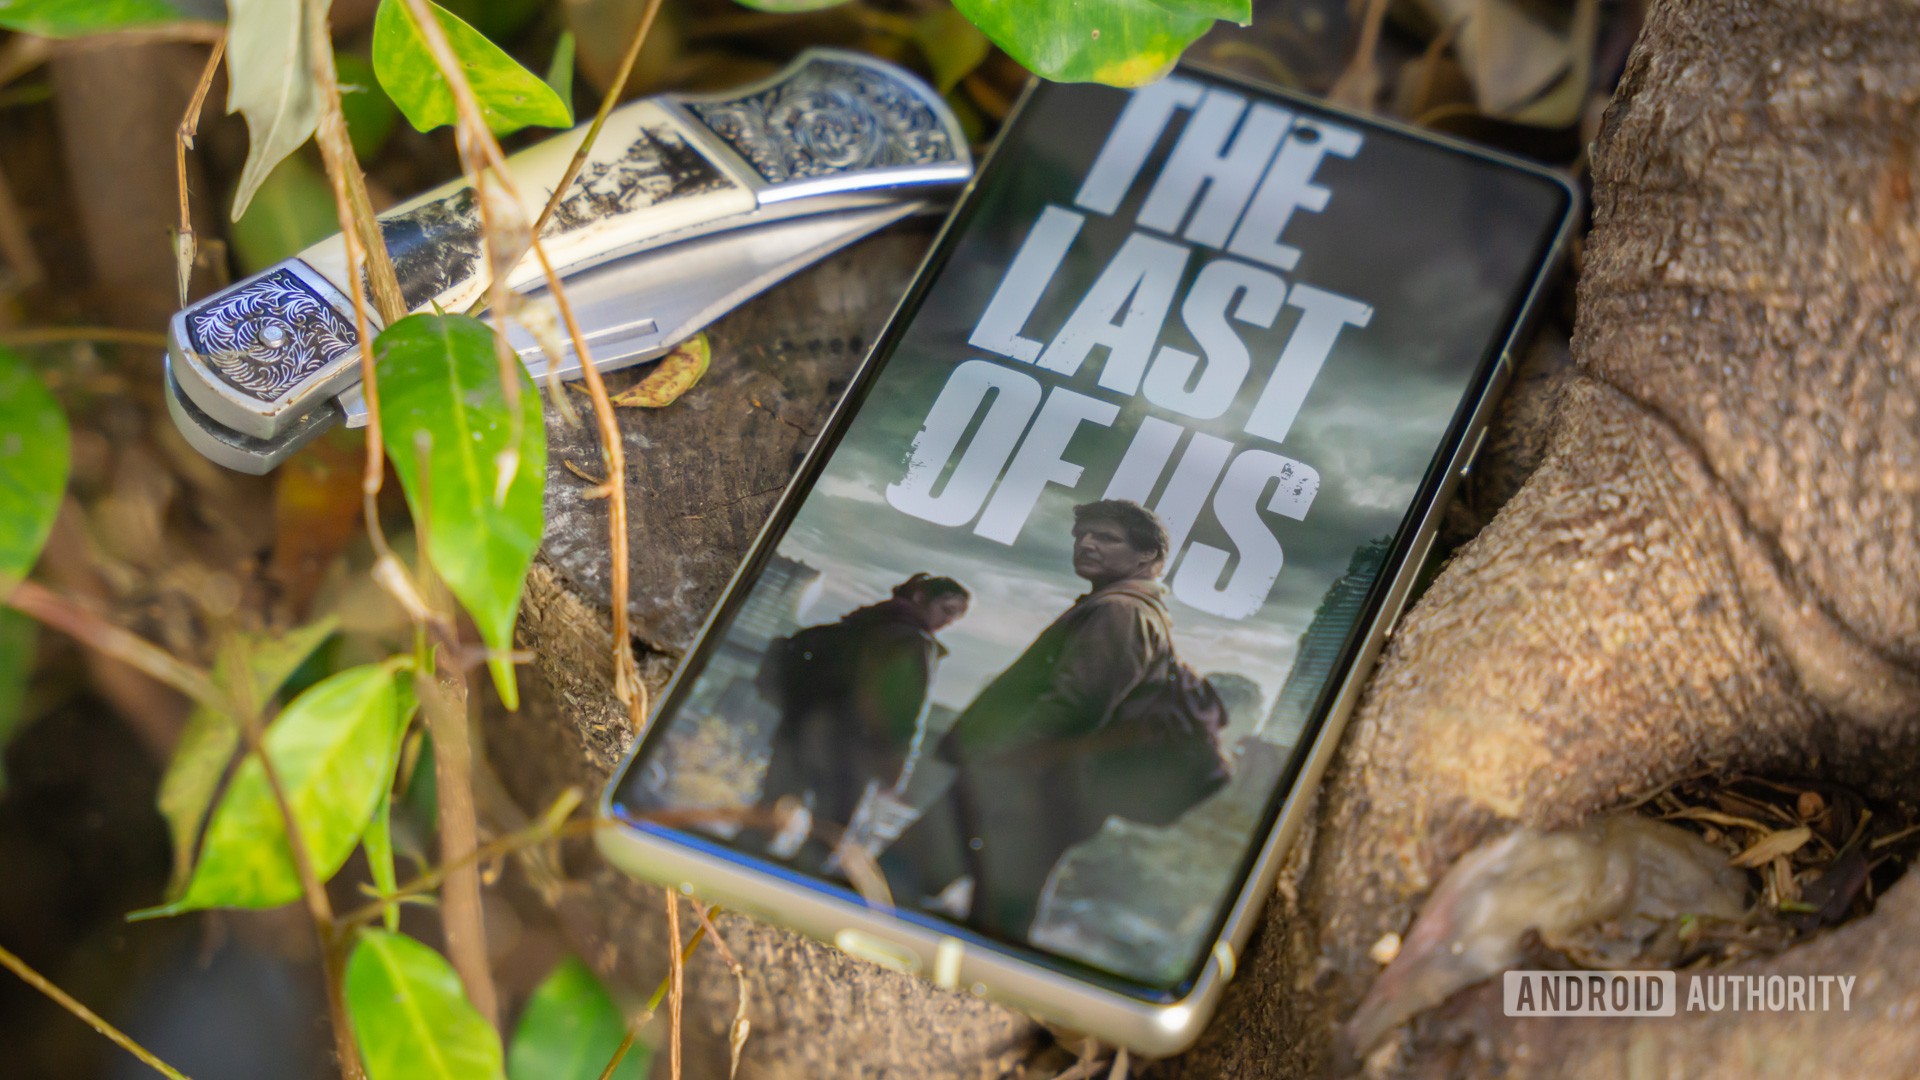 The Last of Us show on smartphone in nature stock photo (3)